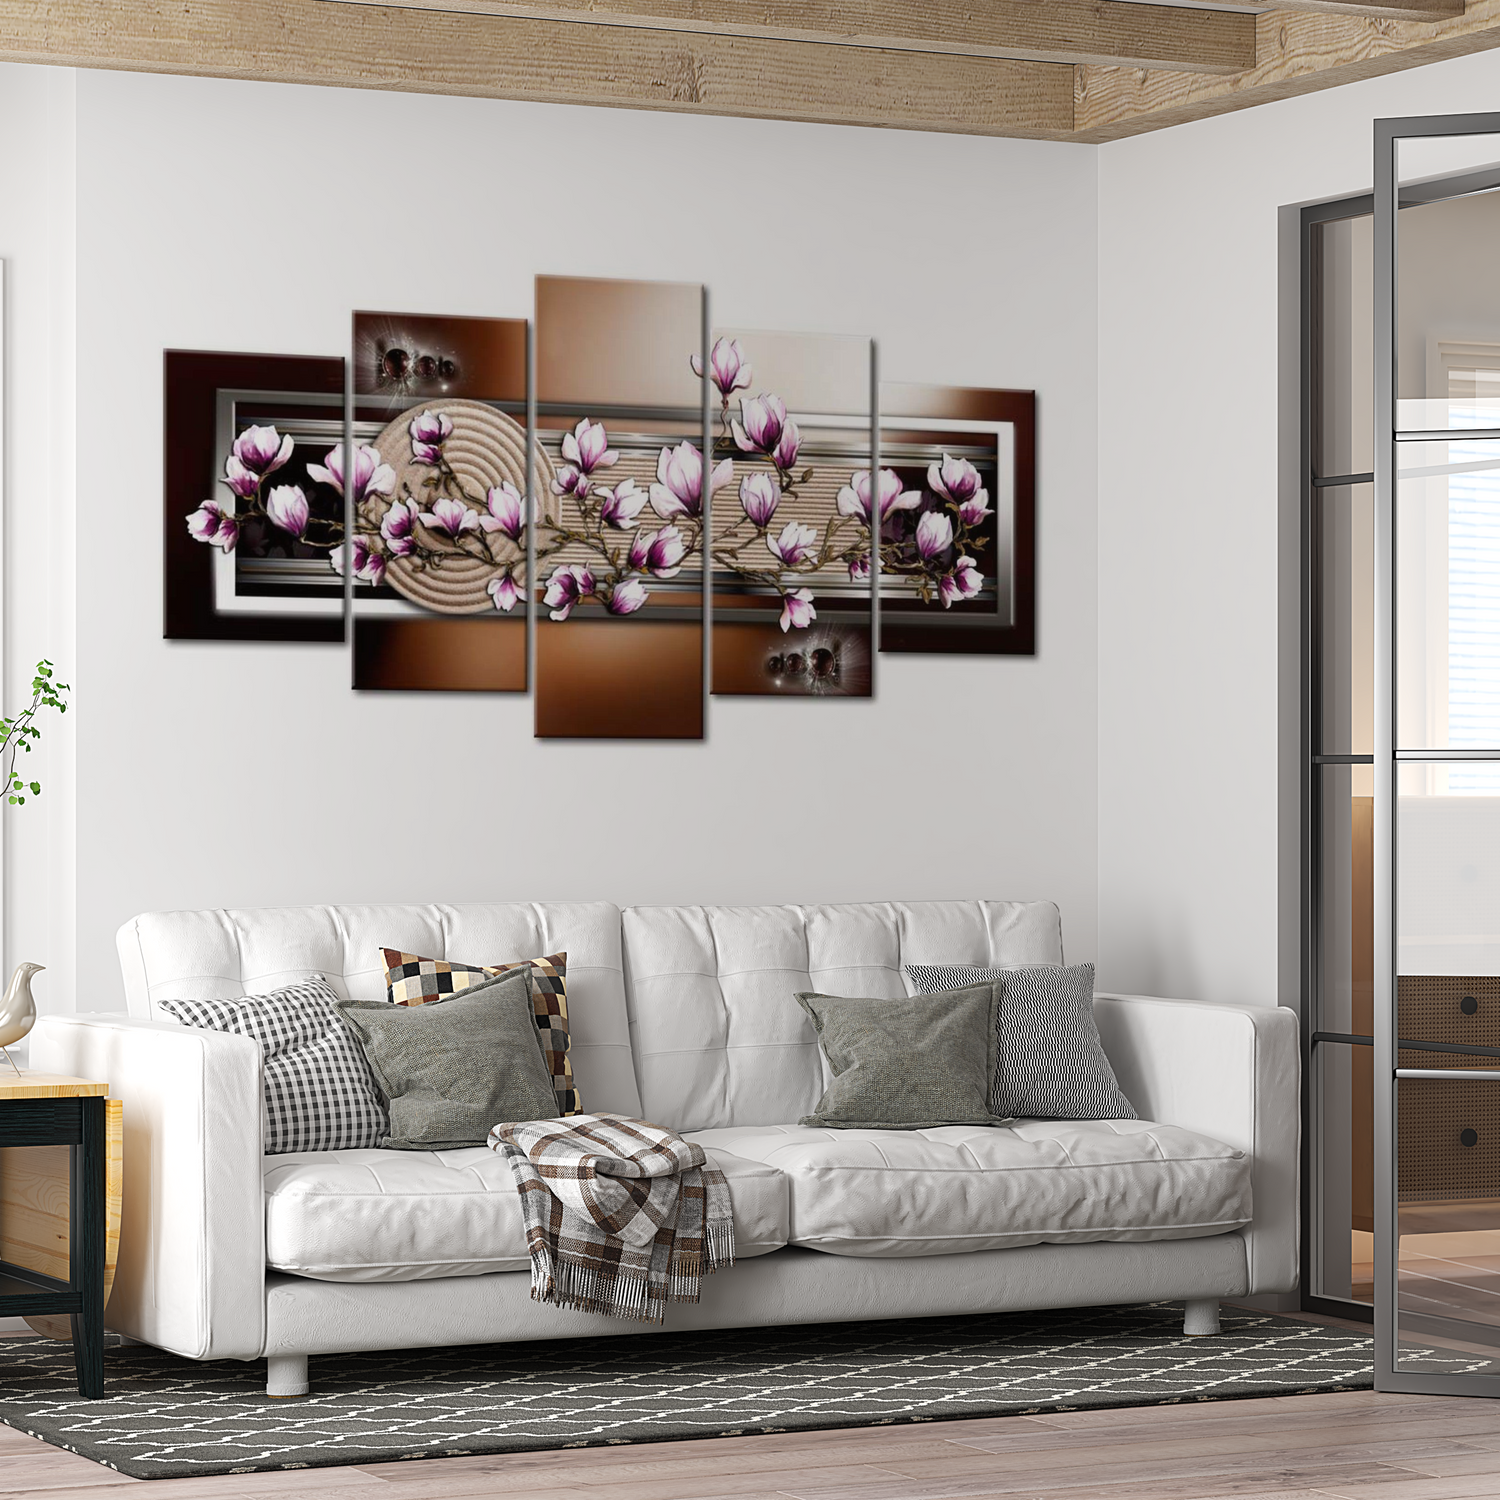 Stretched Canvas Floral Art - Zen Garden And Magnolia 40"Wx20"H